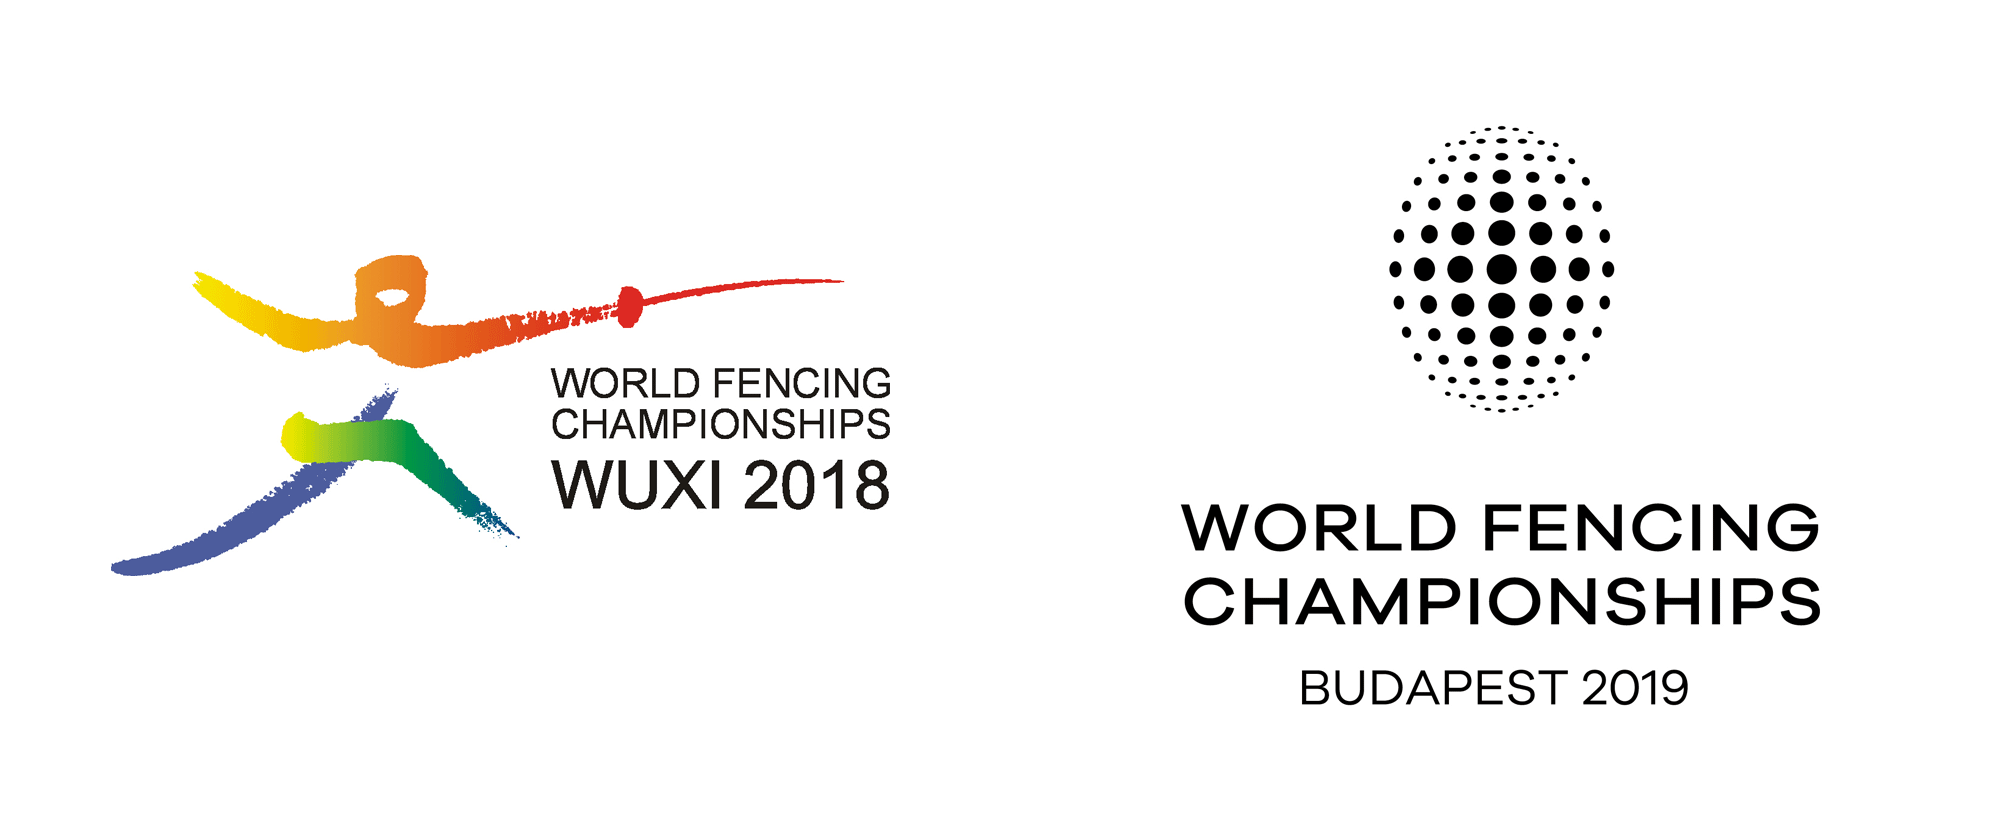 New Logo and Identity for 2019 World Fencing Championships by Explicit Design Studio